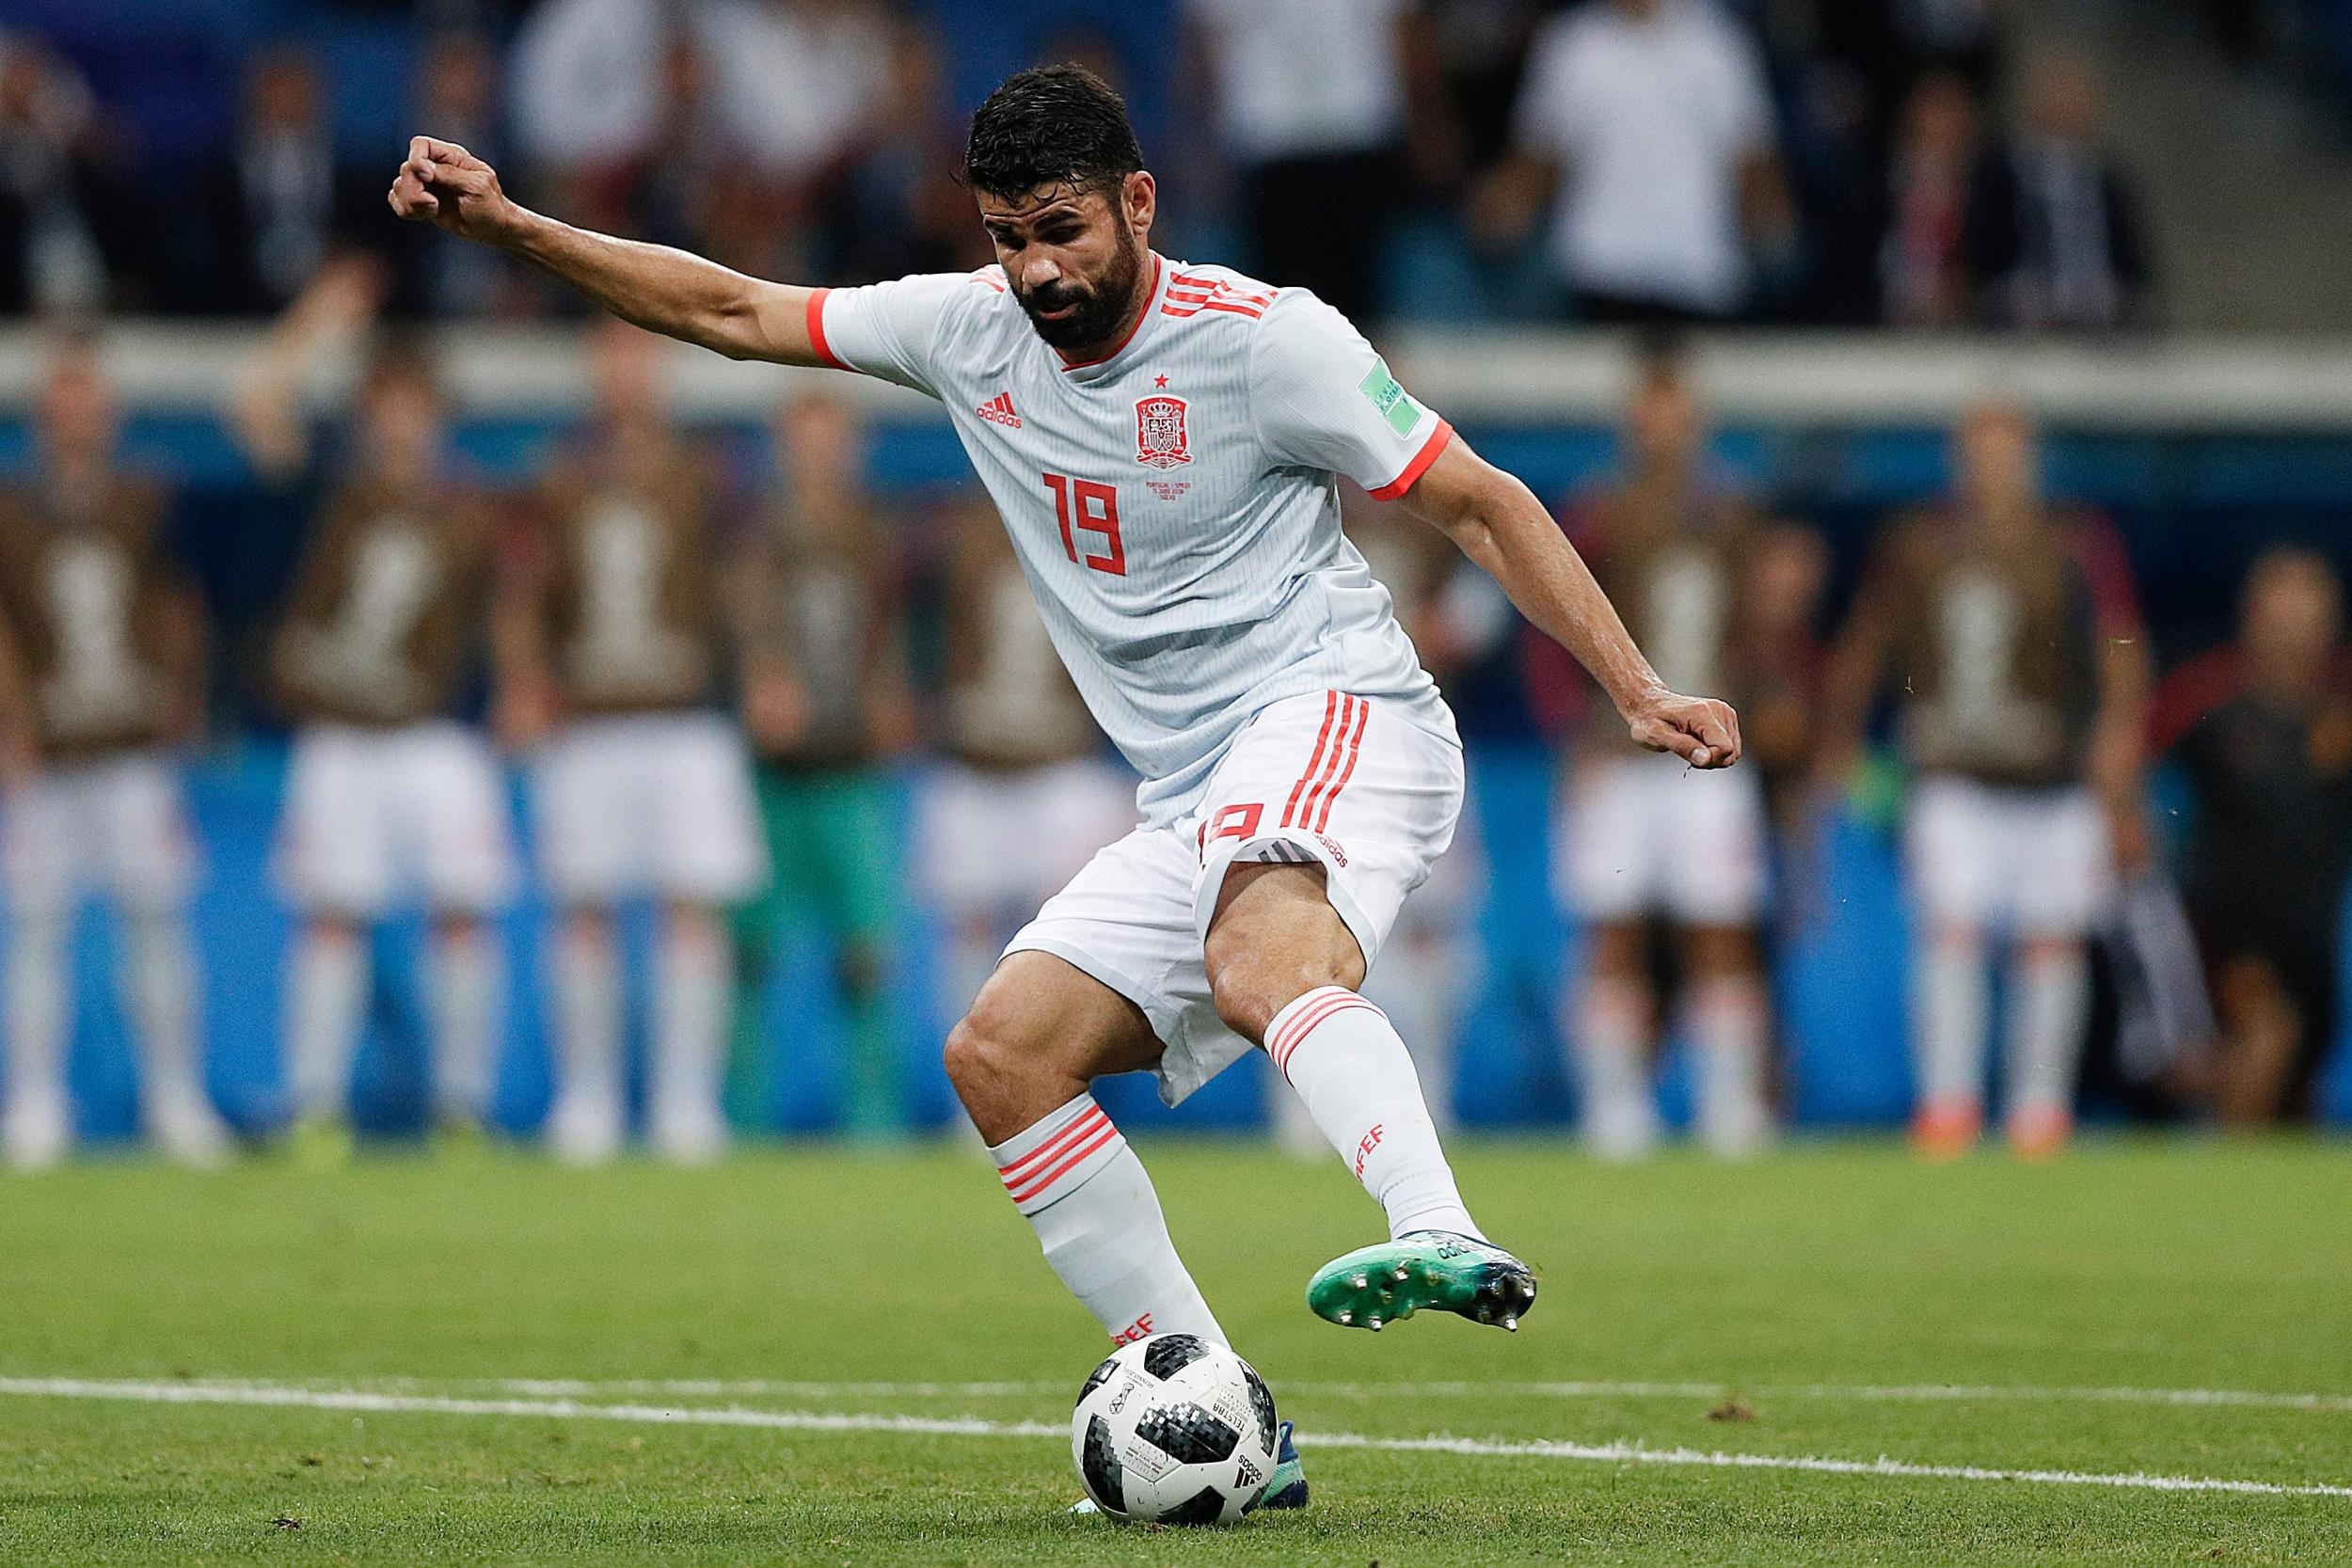 Costa led from the front for Spain